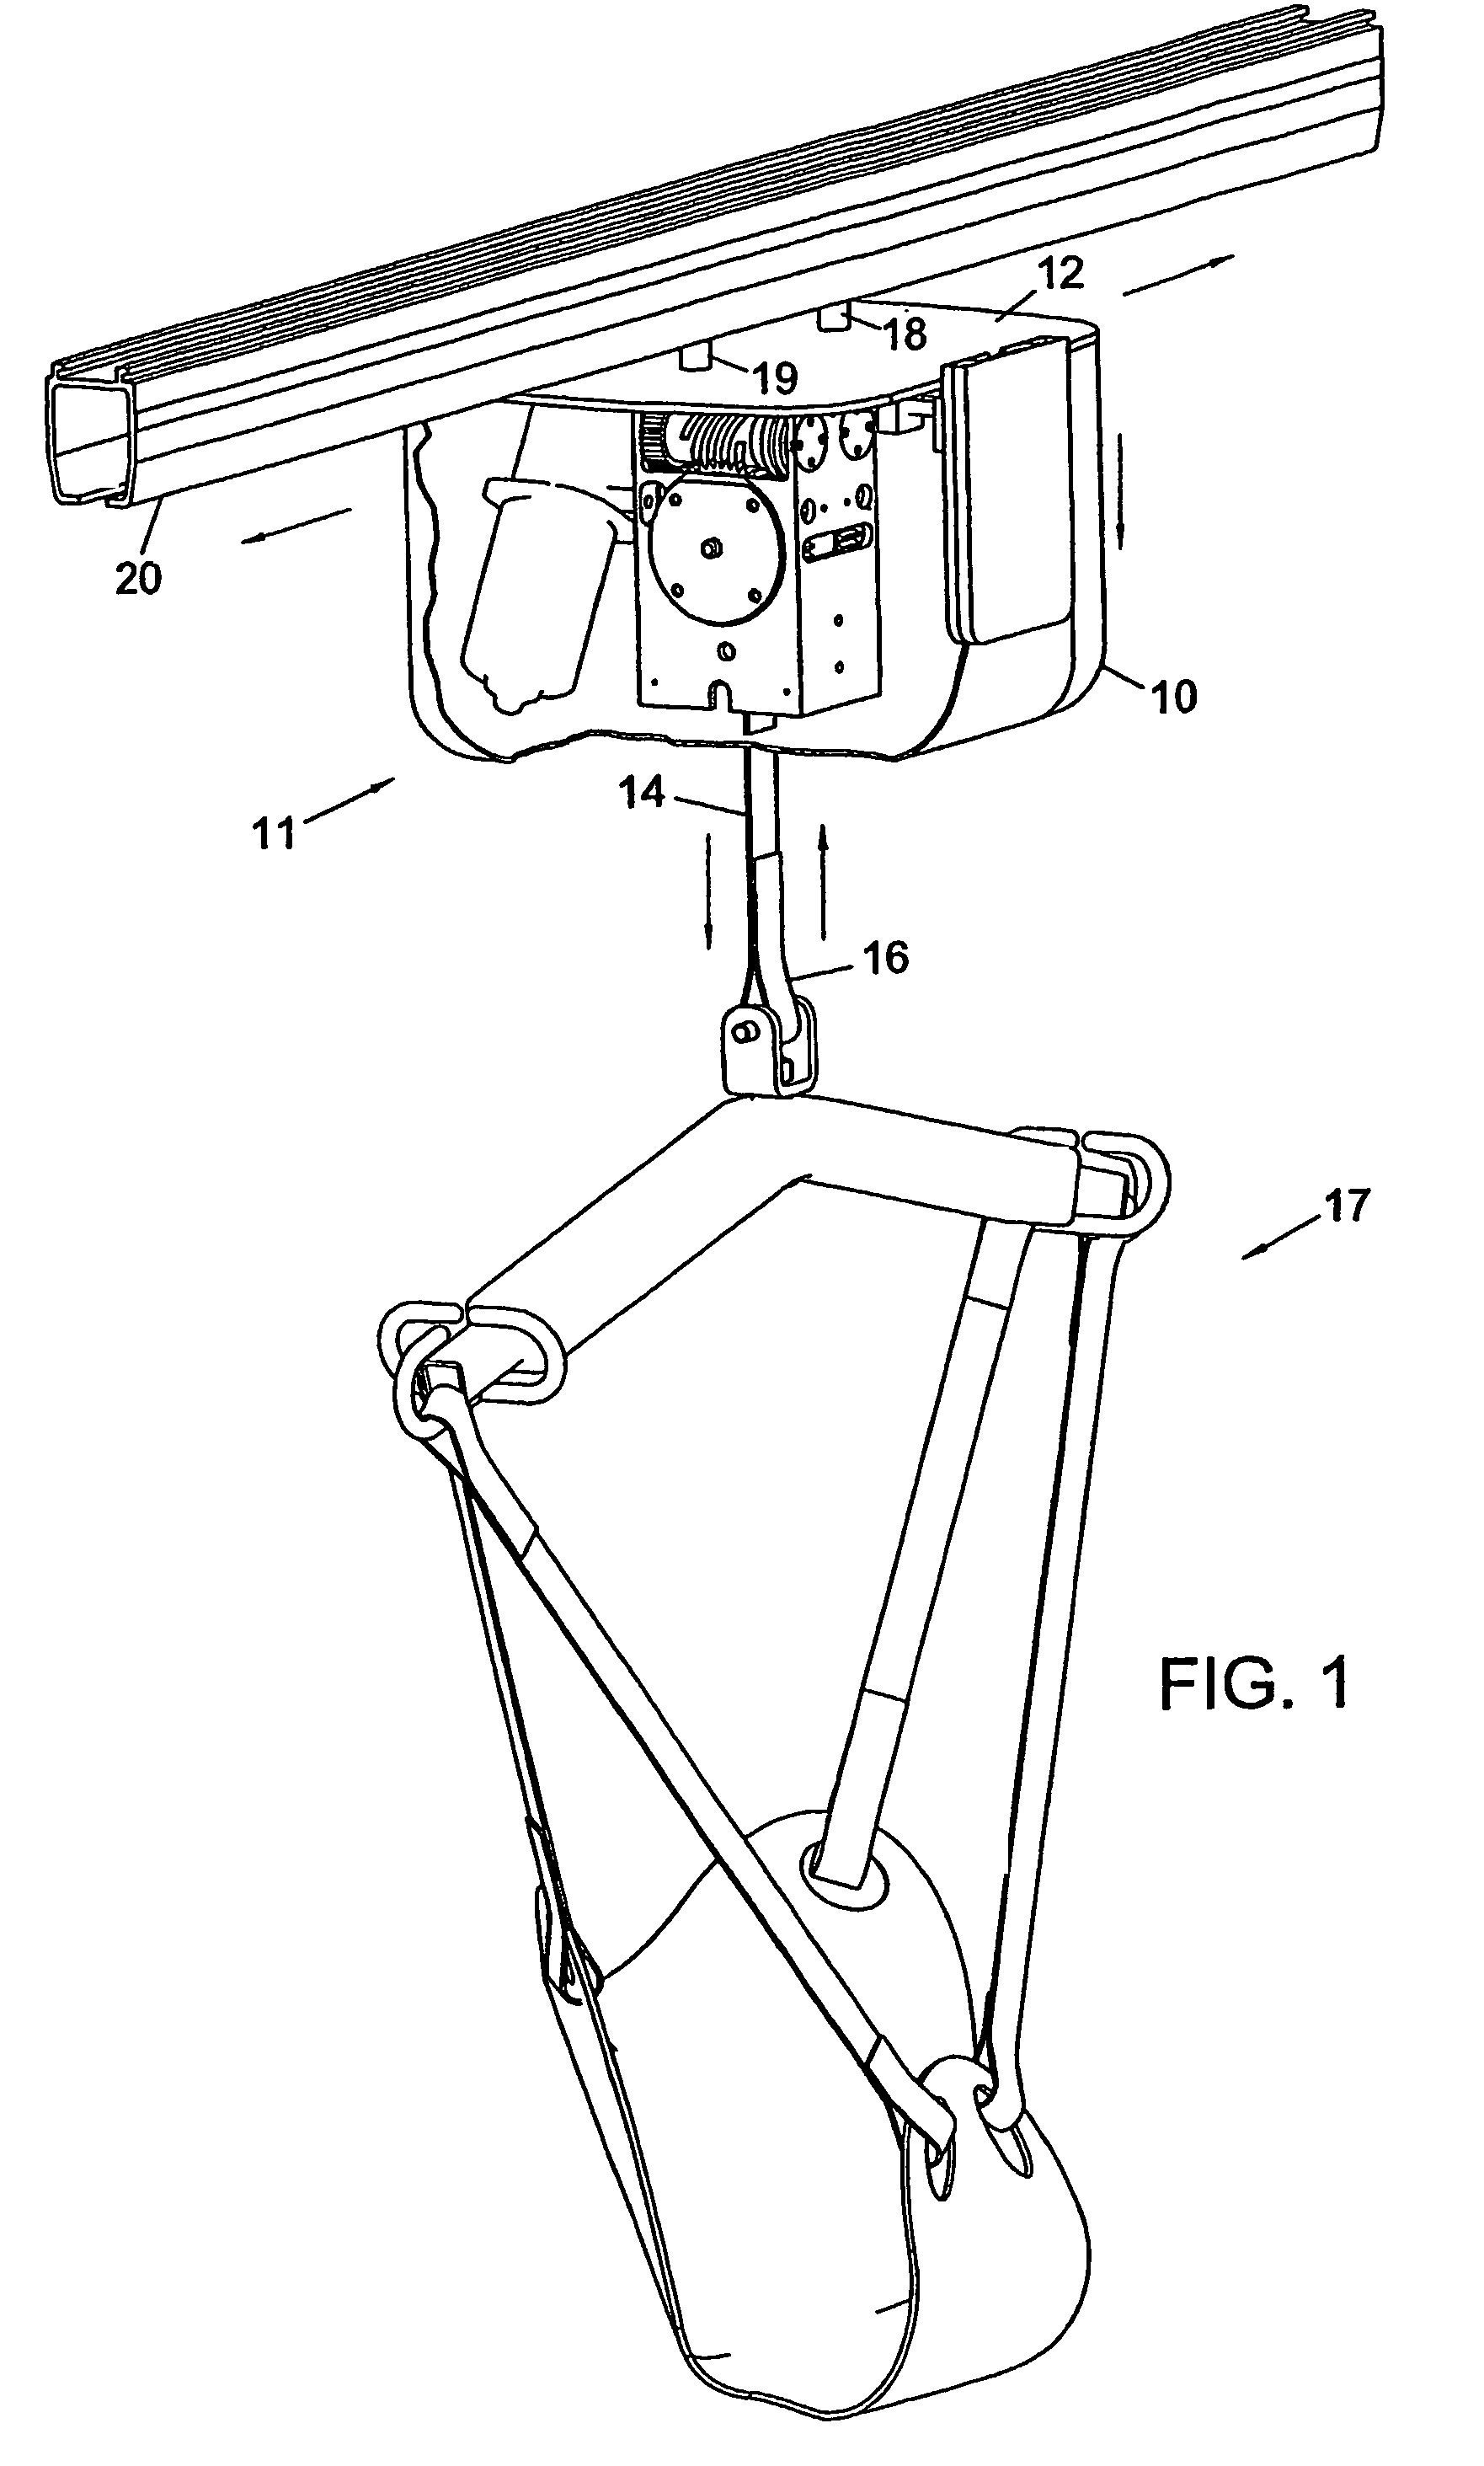 Personal lift device